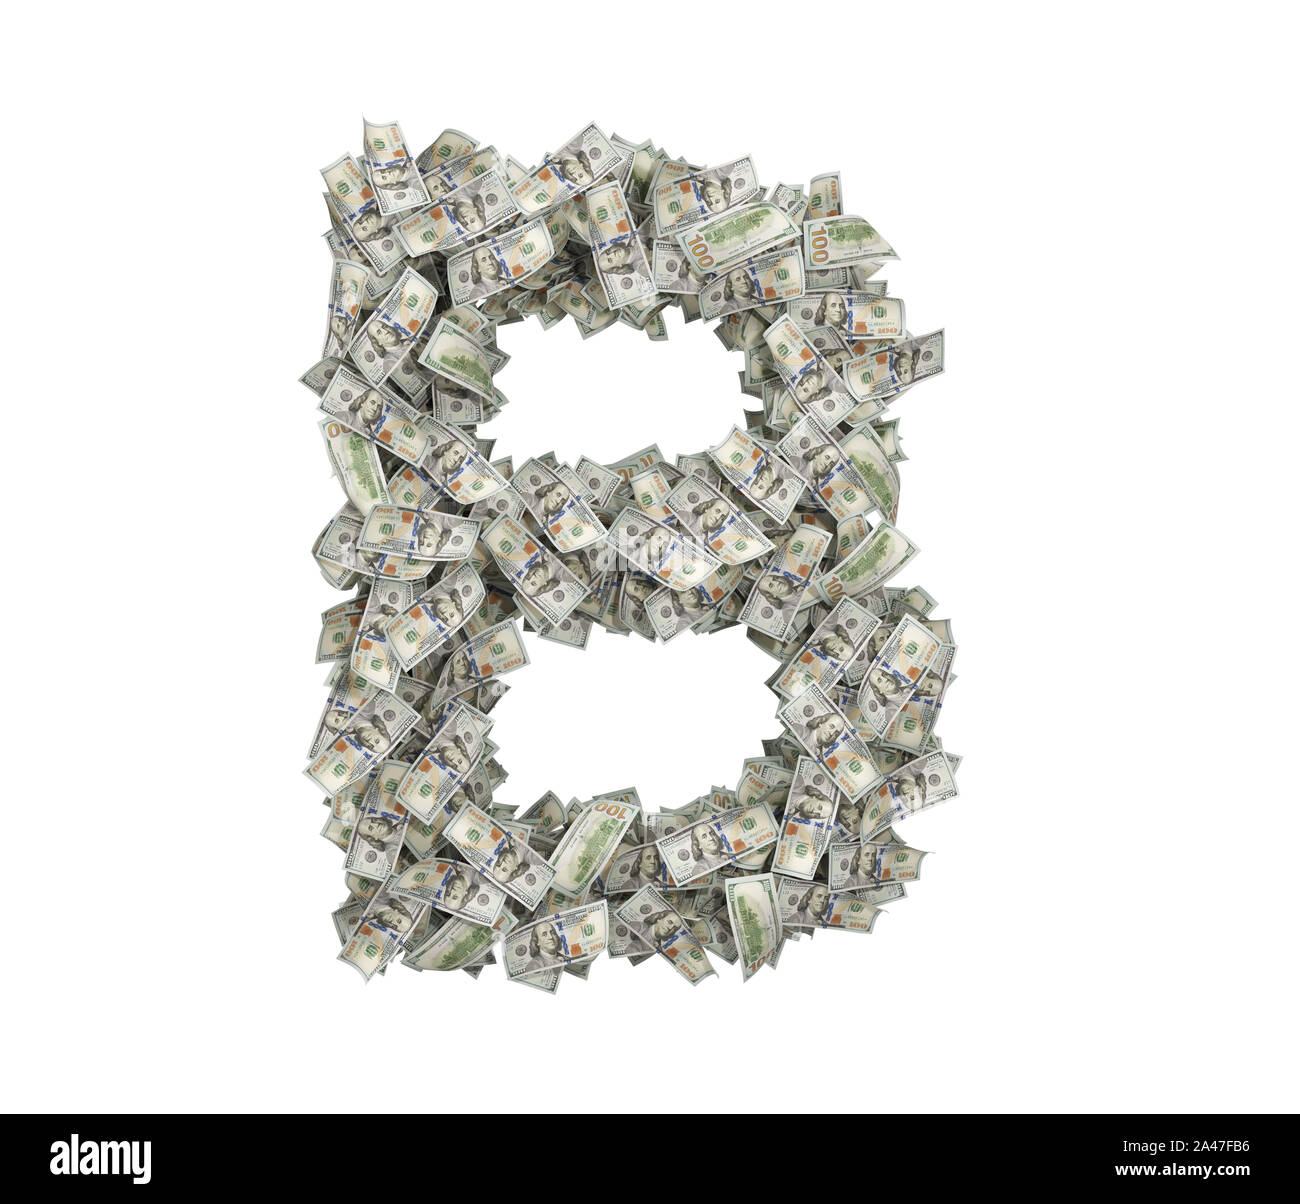 3d rendering of a large isolated large letter B made of many one hundred dollar bills. Money and bills. American currency. Alphabet and letters. Stock Photo